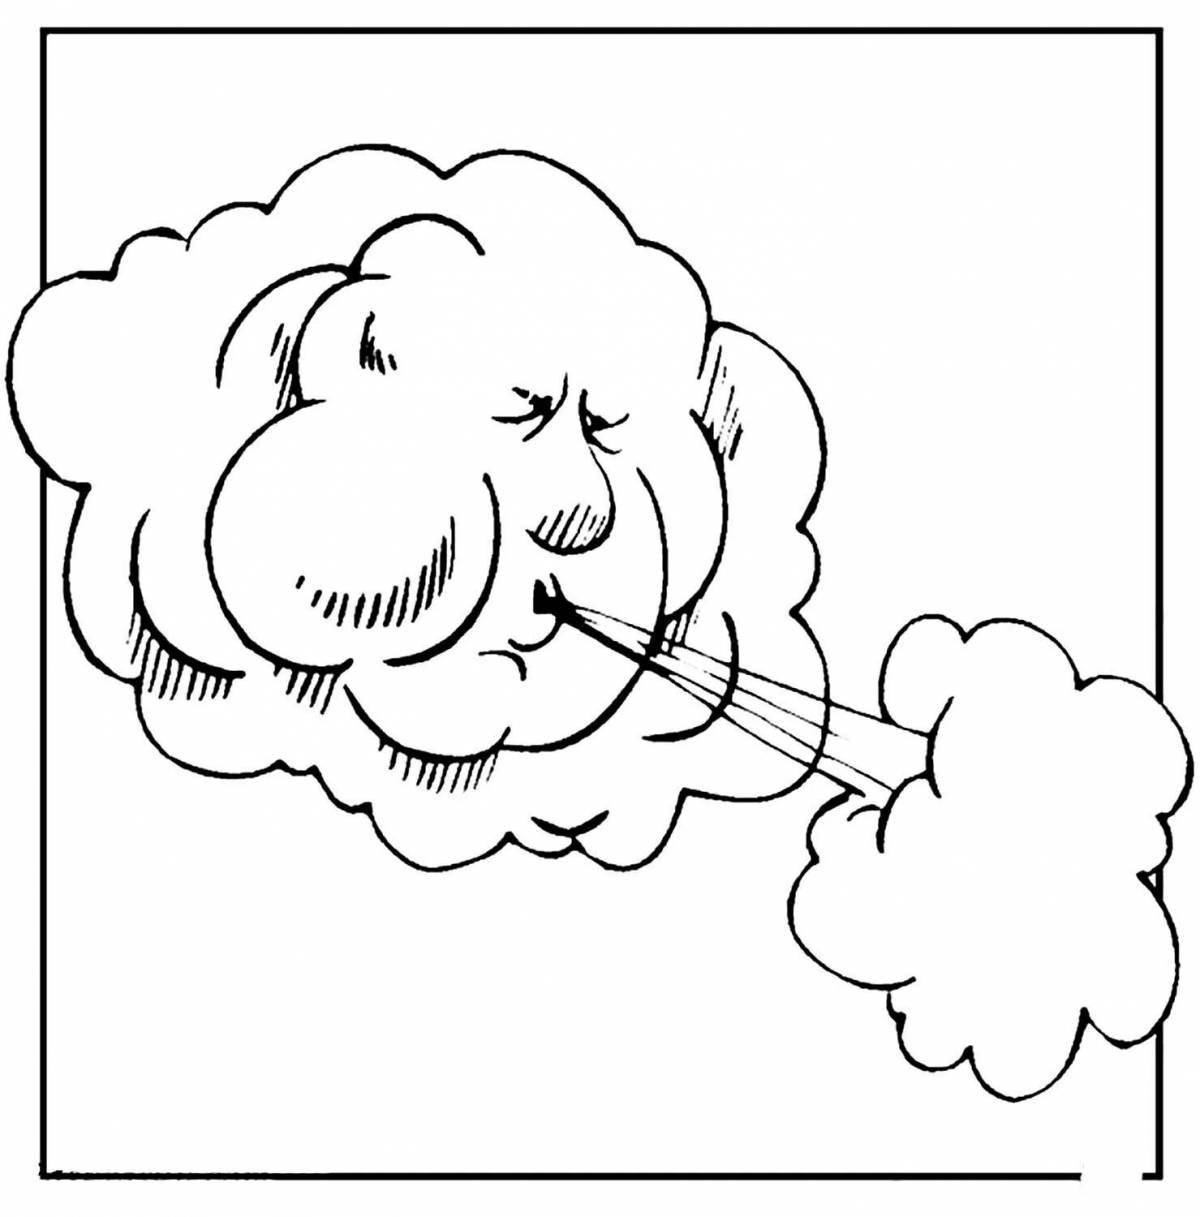 Sparkling wind coloring page